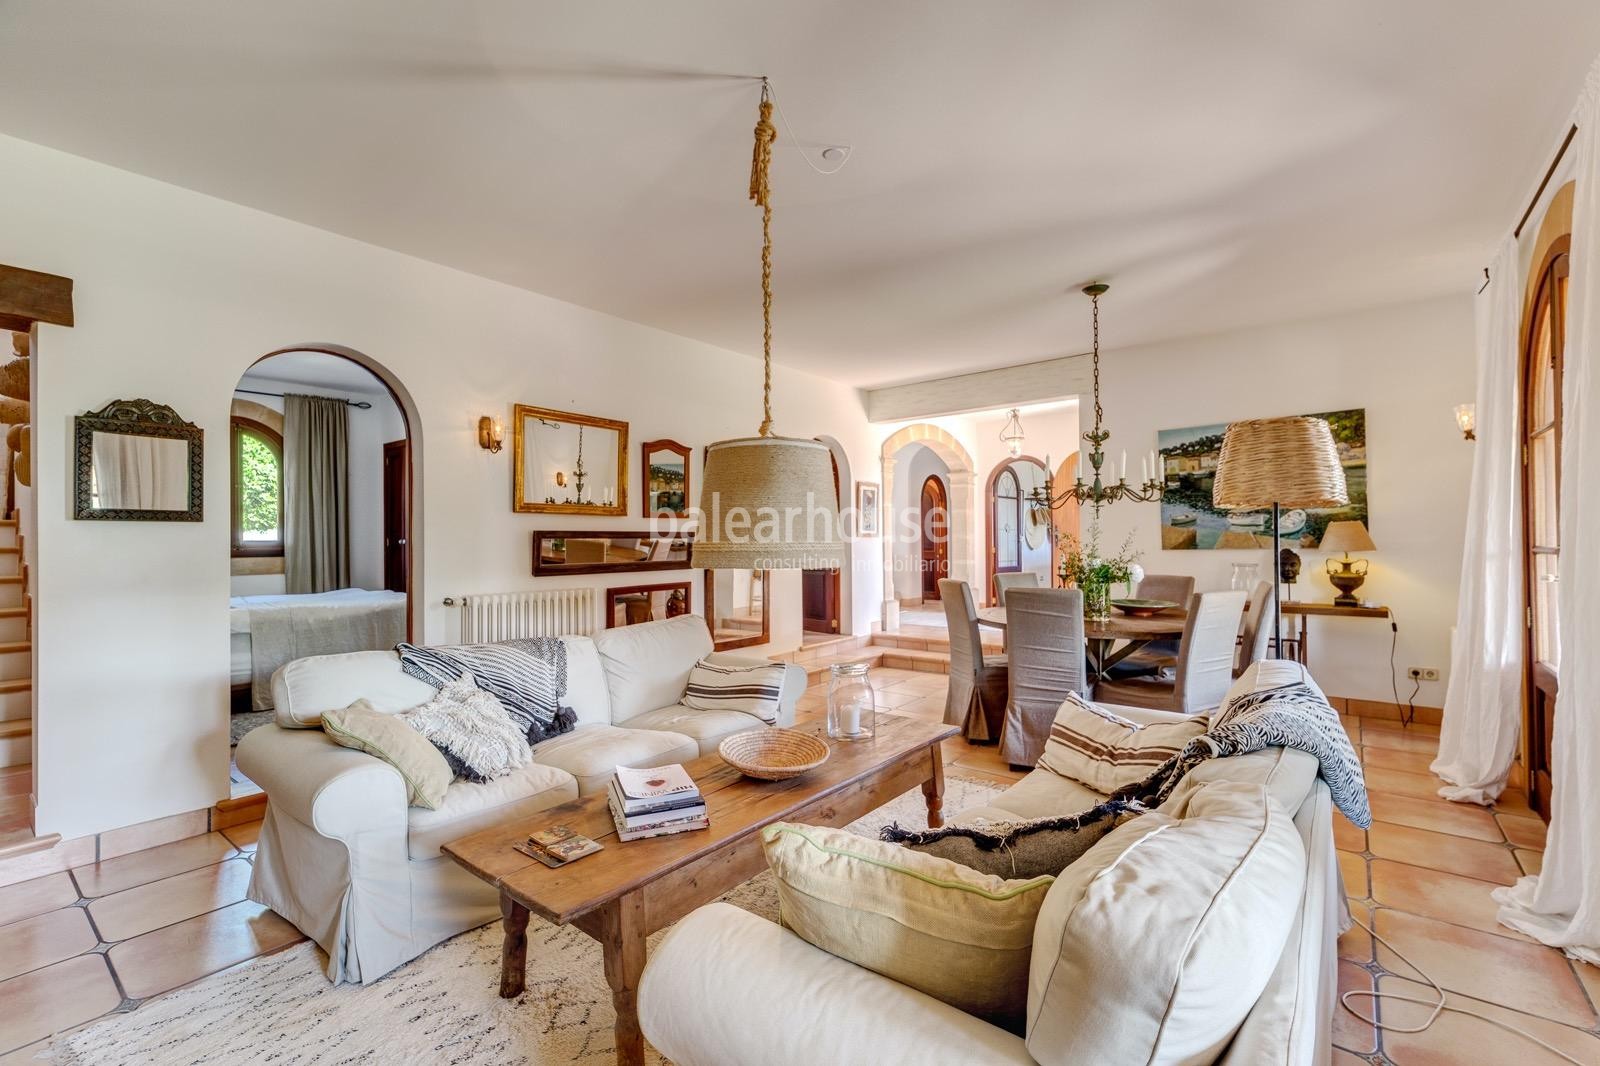 Beautiful finca with large outdoor garden areas, porches and swimming pool located close to beaches.